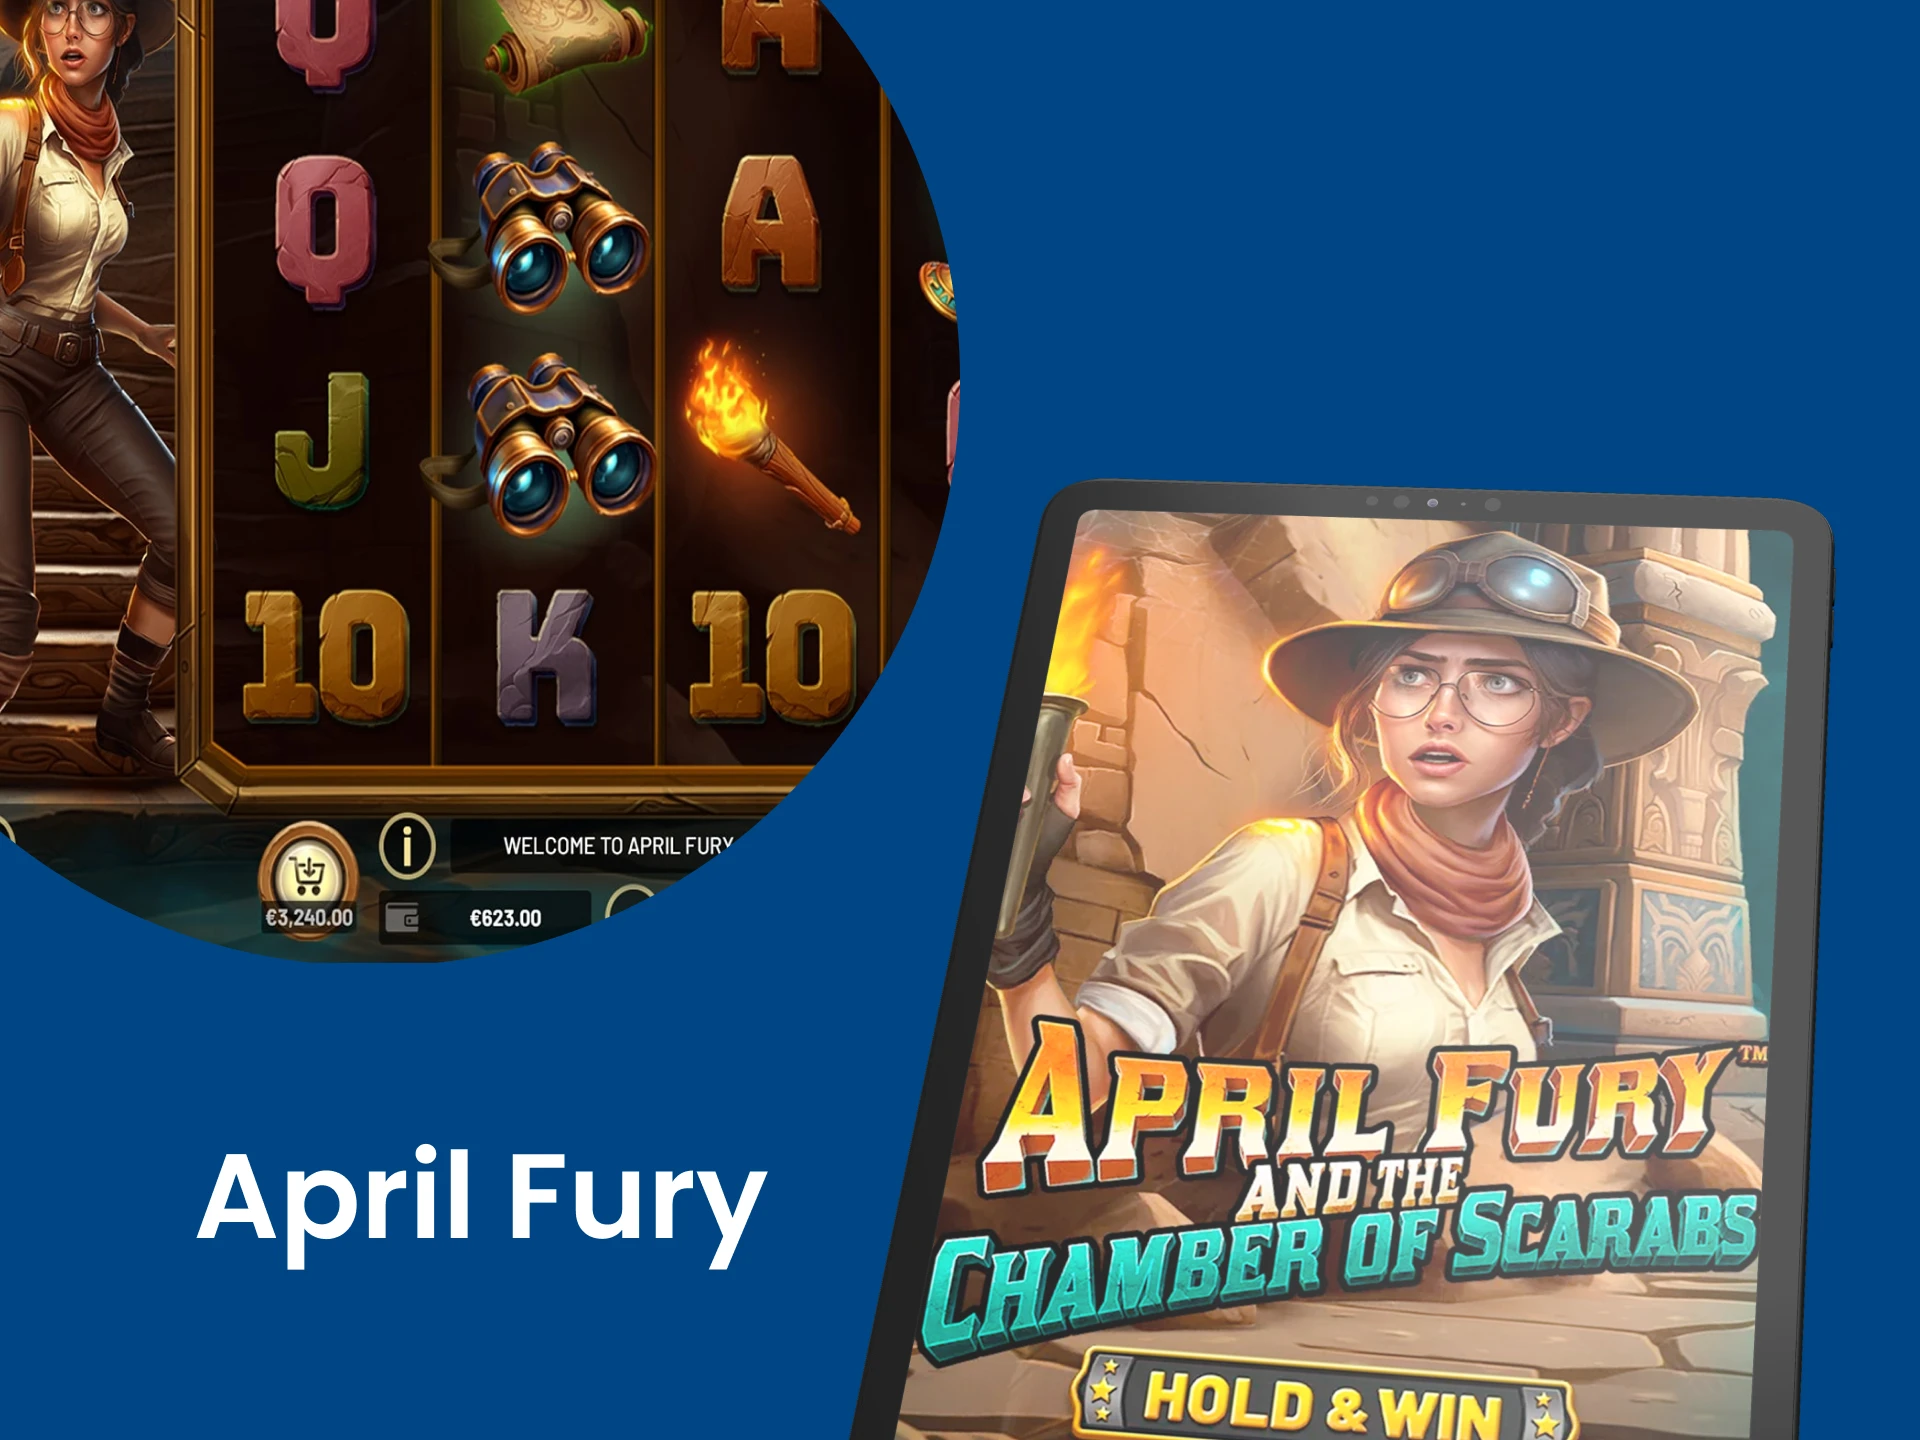 Play April Fury on iPad devices.